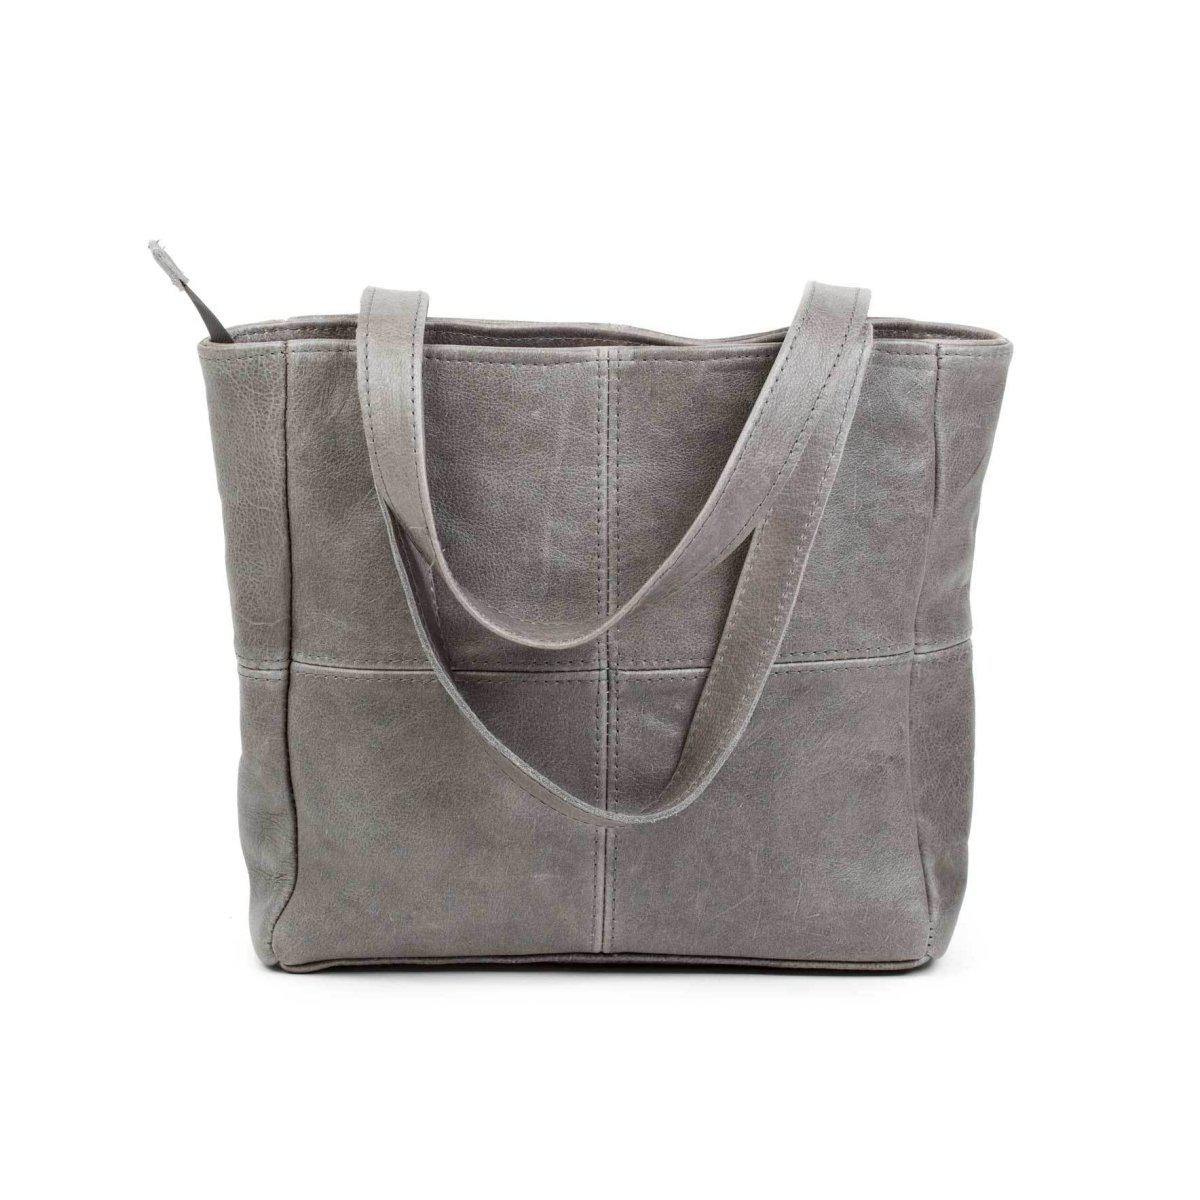 Mirelle Leather Classic Shopper Handbag - Small - Mirelle Leather and Lifestyle